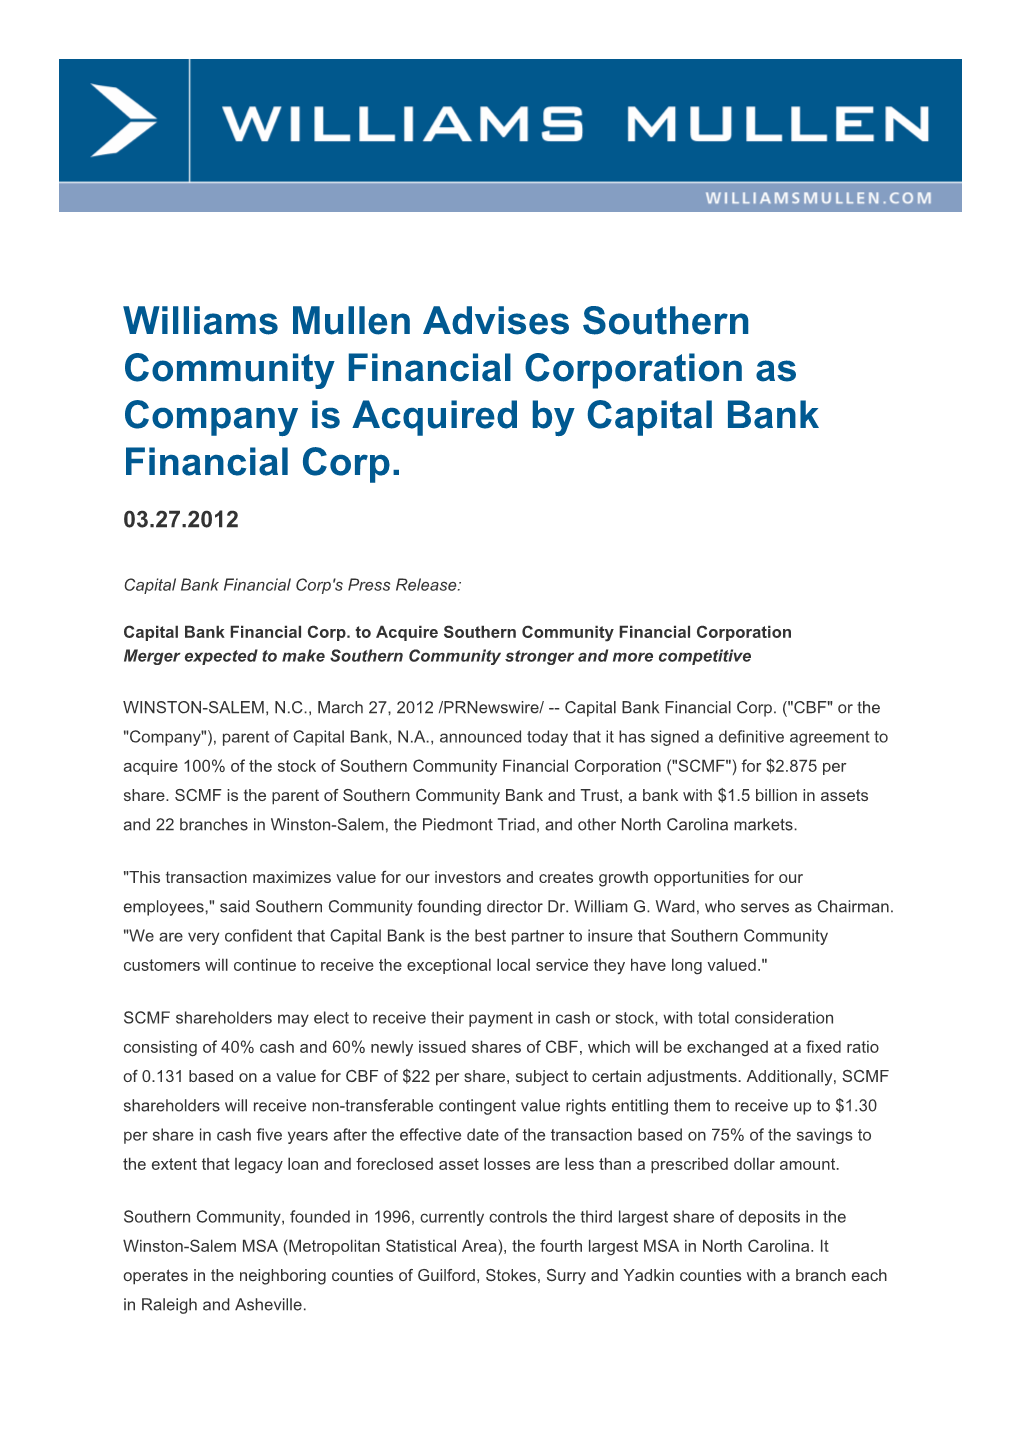 Williams Mullen Advises Southern Community Financial Corporation As Company Is Acquired by Capital Bank Financial Corp